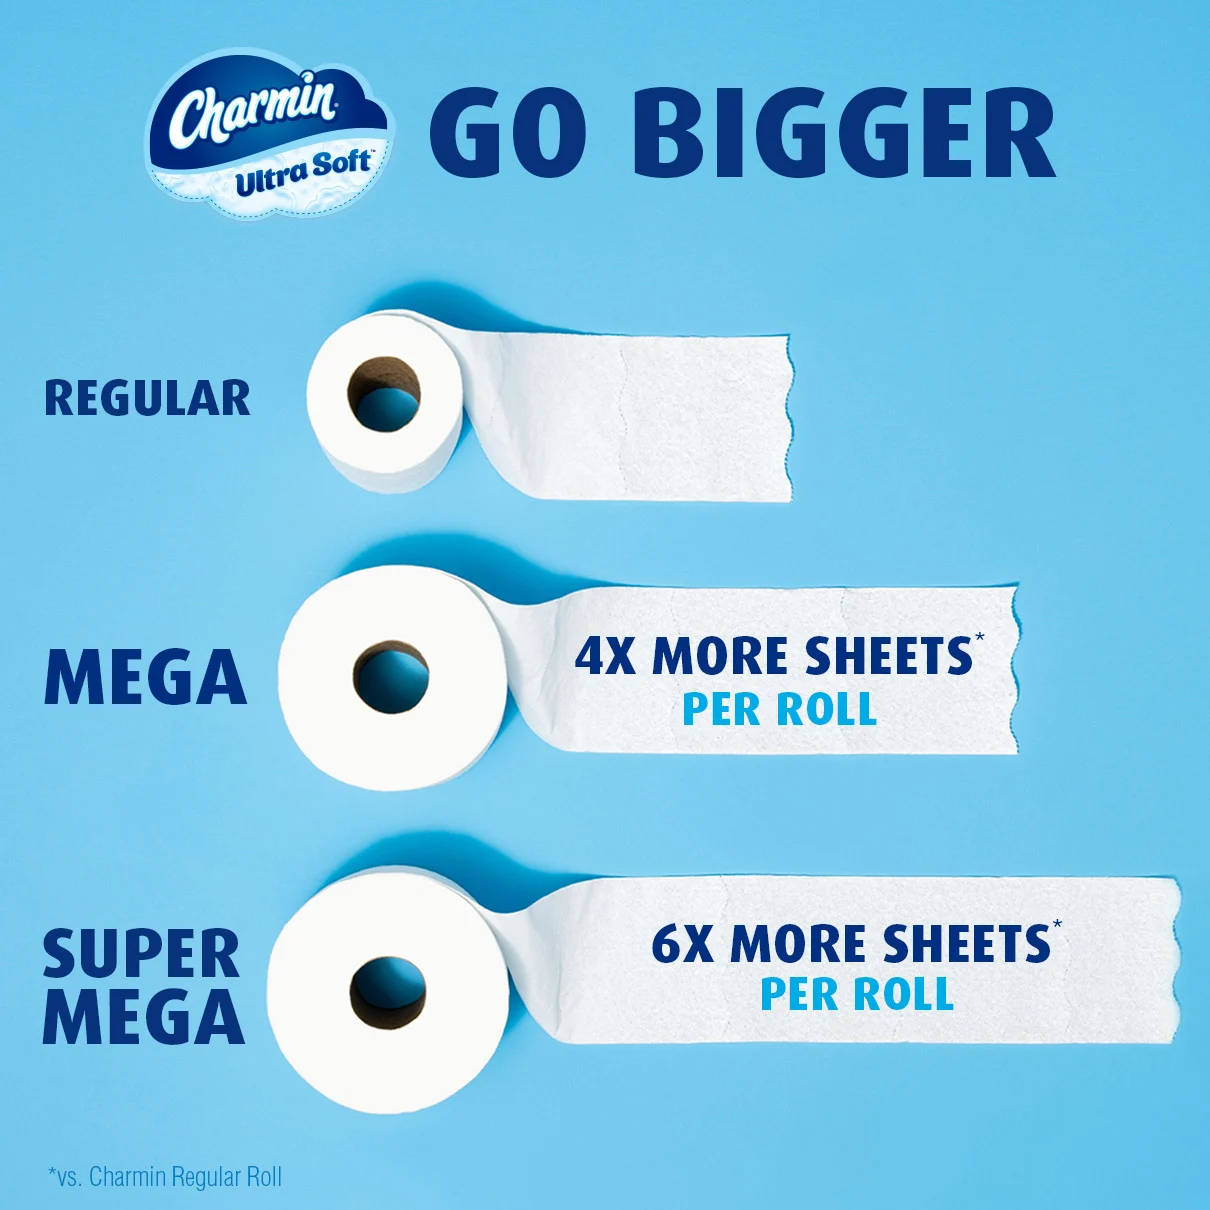 2x more absorbing soft toilet paper 7